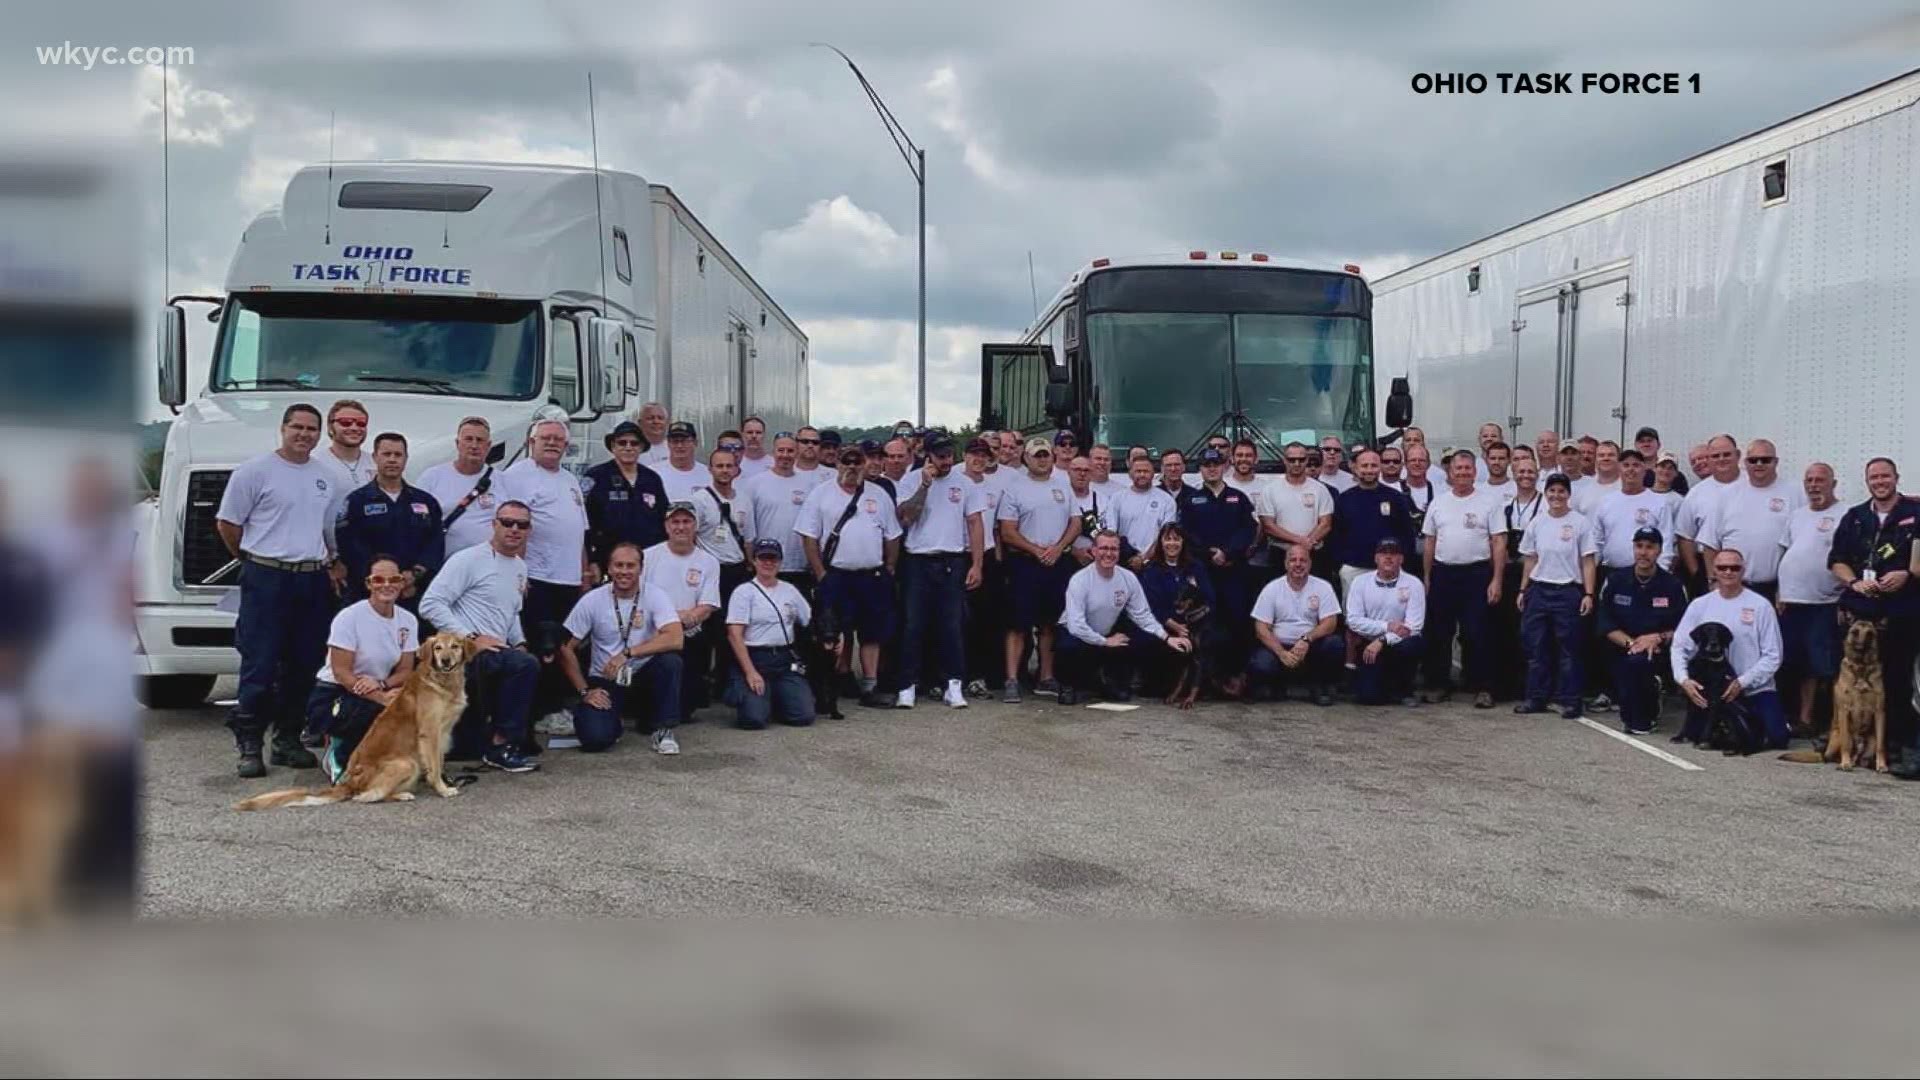 Ohio's Task Force 1's 80-man team arrived in Miami Wednesday evening. They will begin 12-hour shifts of search and rescue at midnight Saturday.